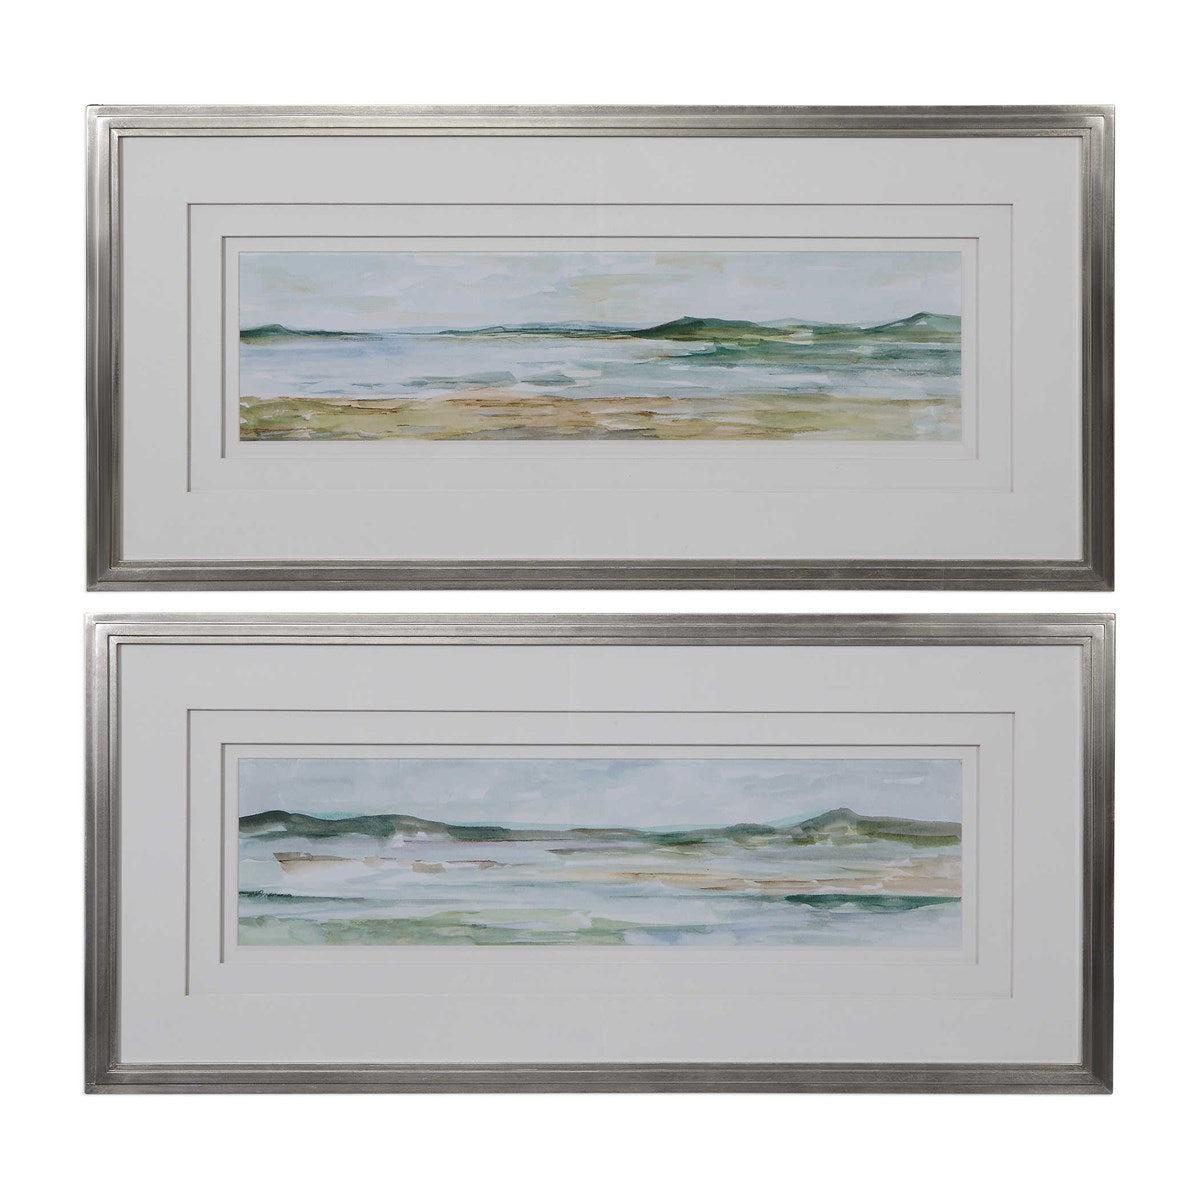 "Panoramic Seascape" - Sold Individually